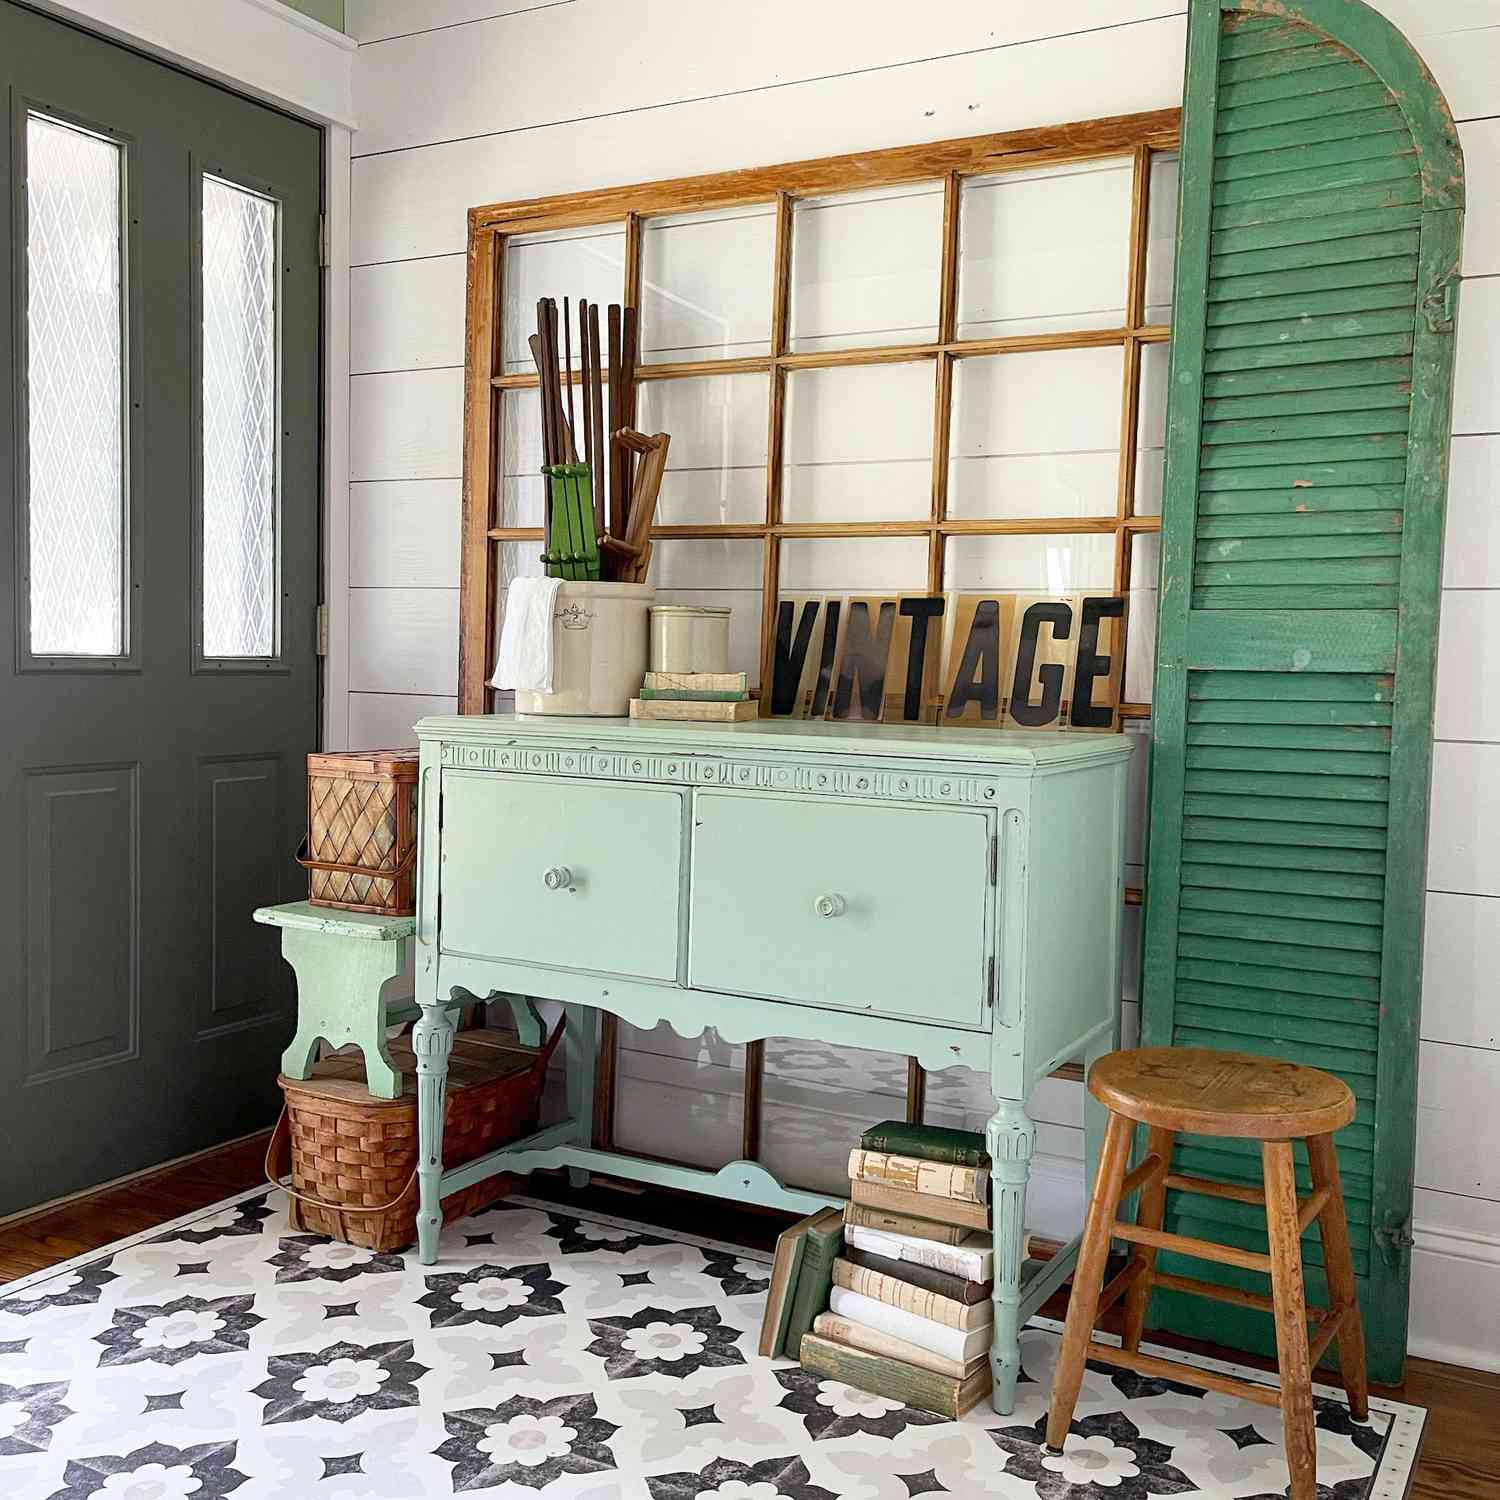 Entryway with vintage green decor and storage cabinet, window panes, shutters